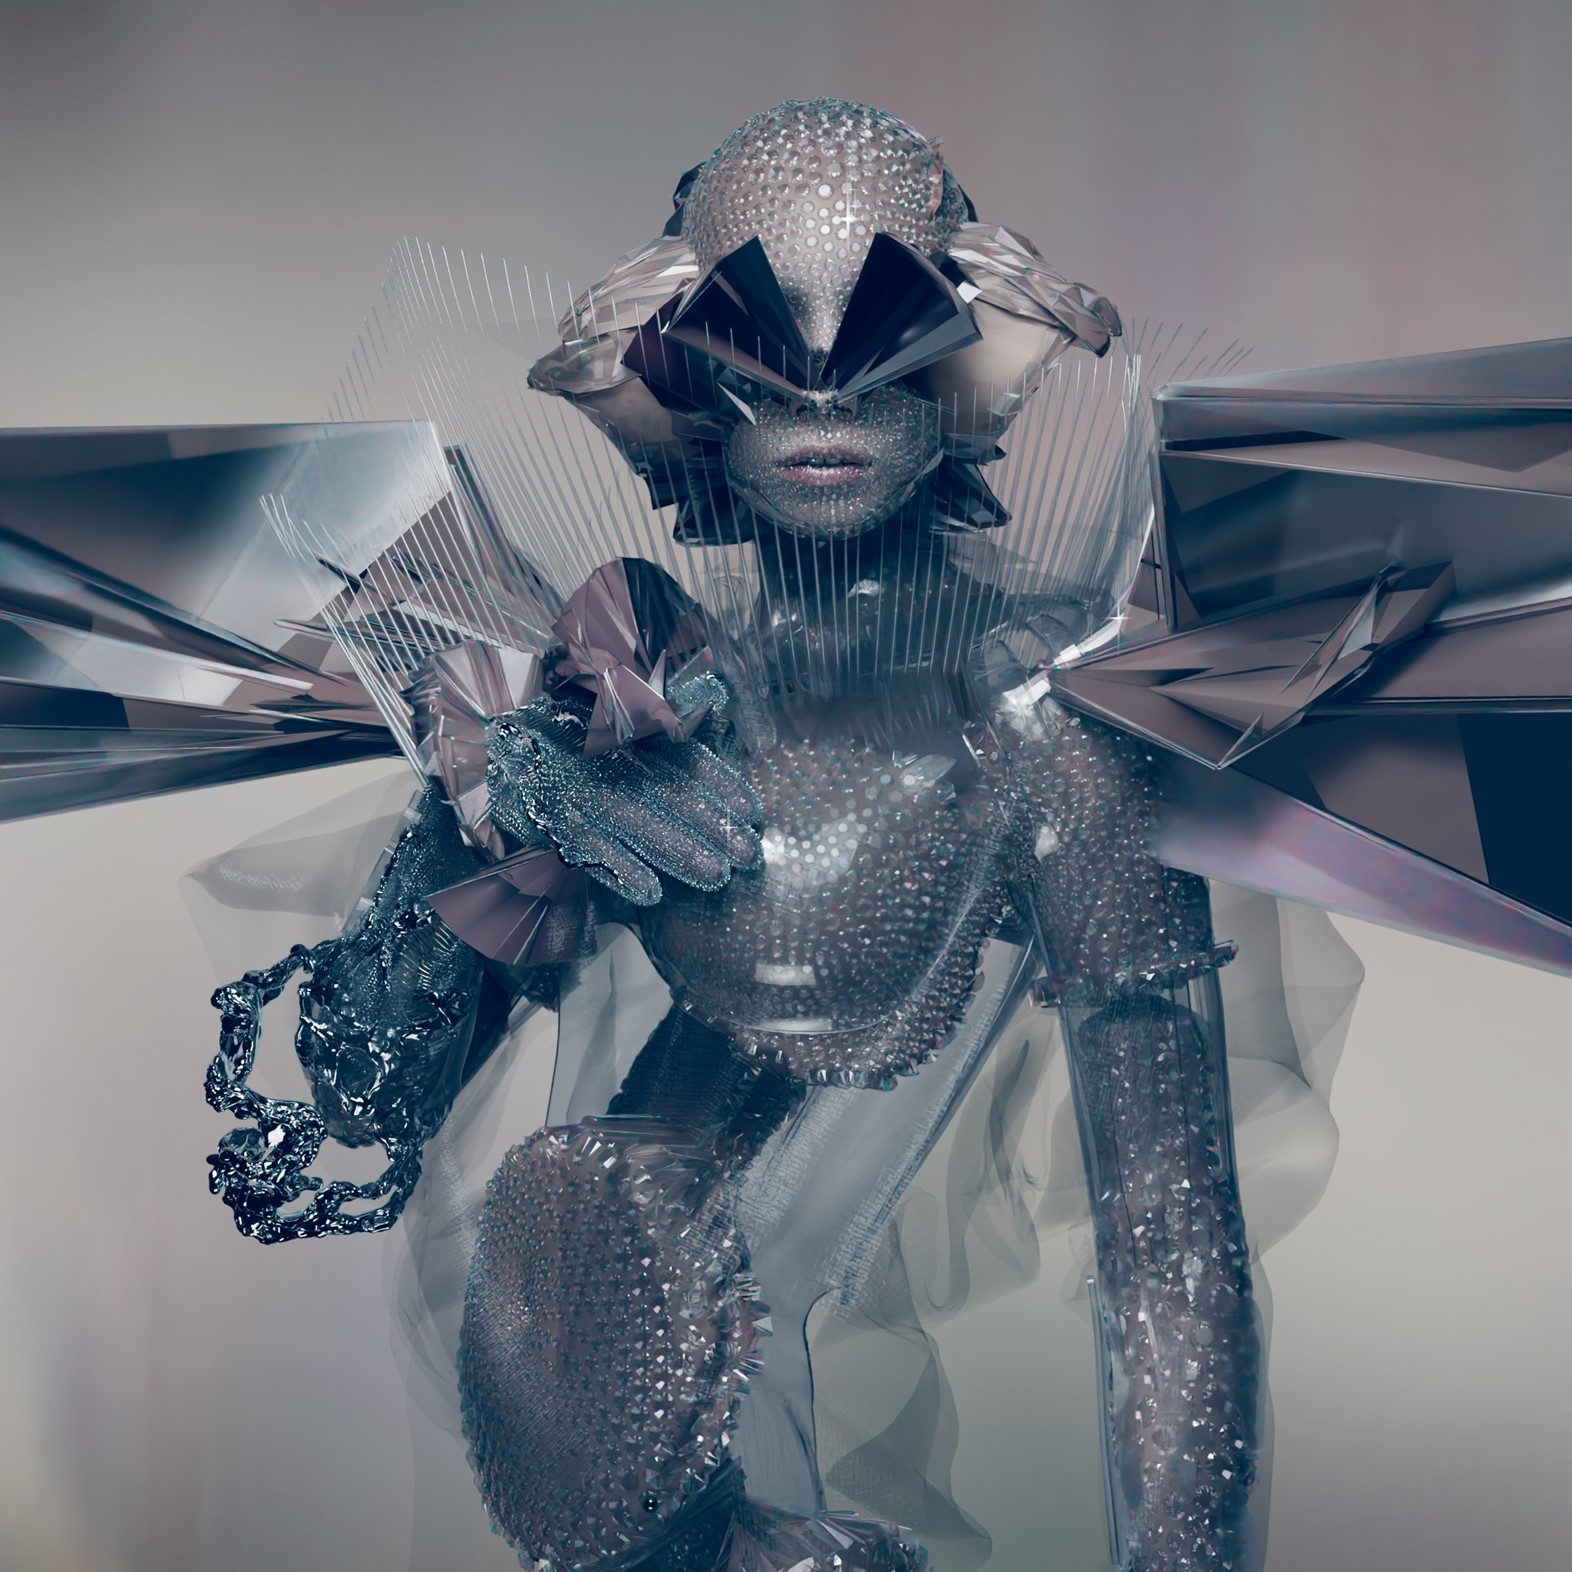 Nick Knight is building a 'new civilisation' in the metaverse | Dazed